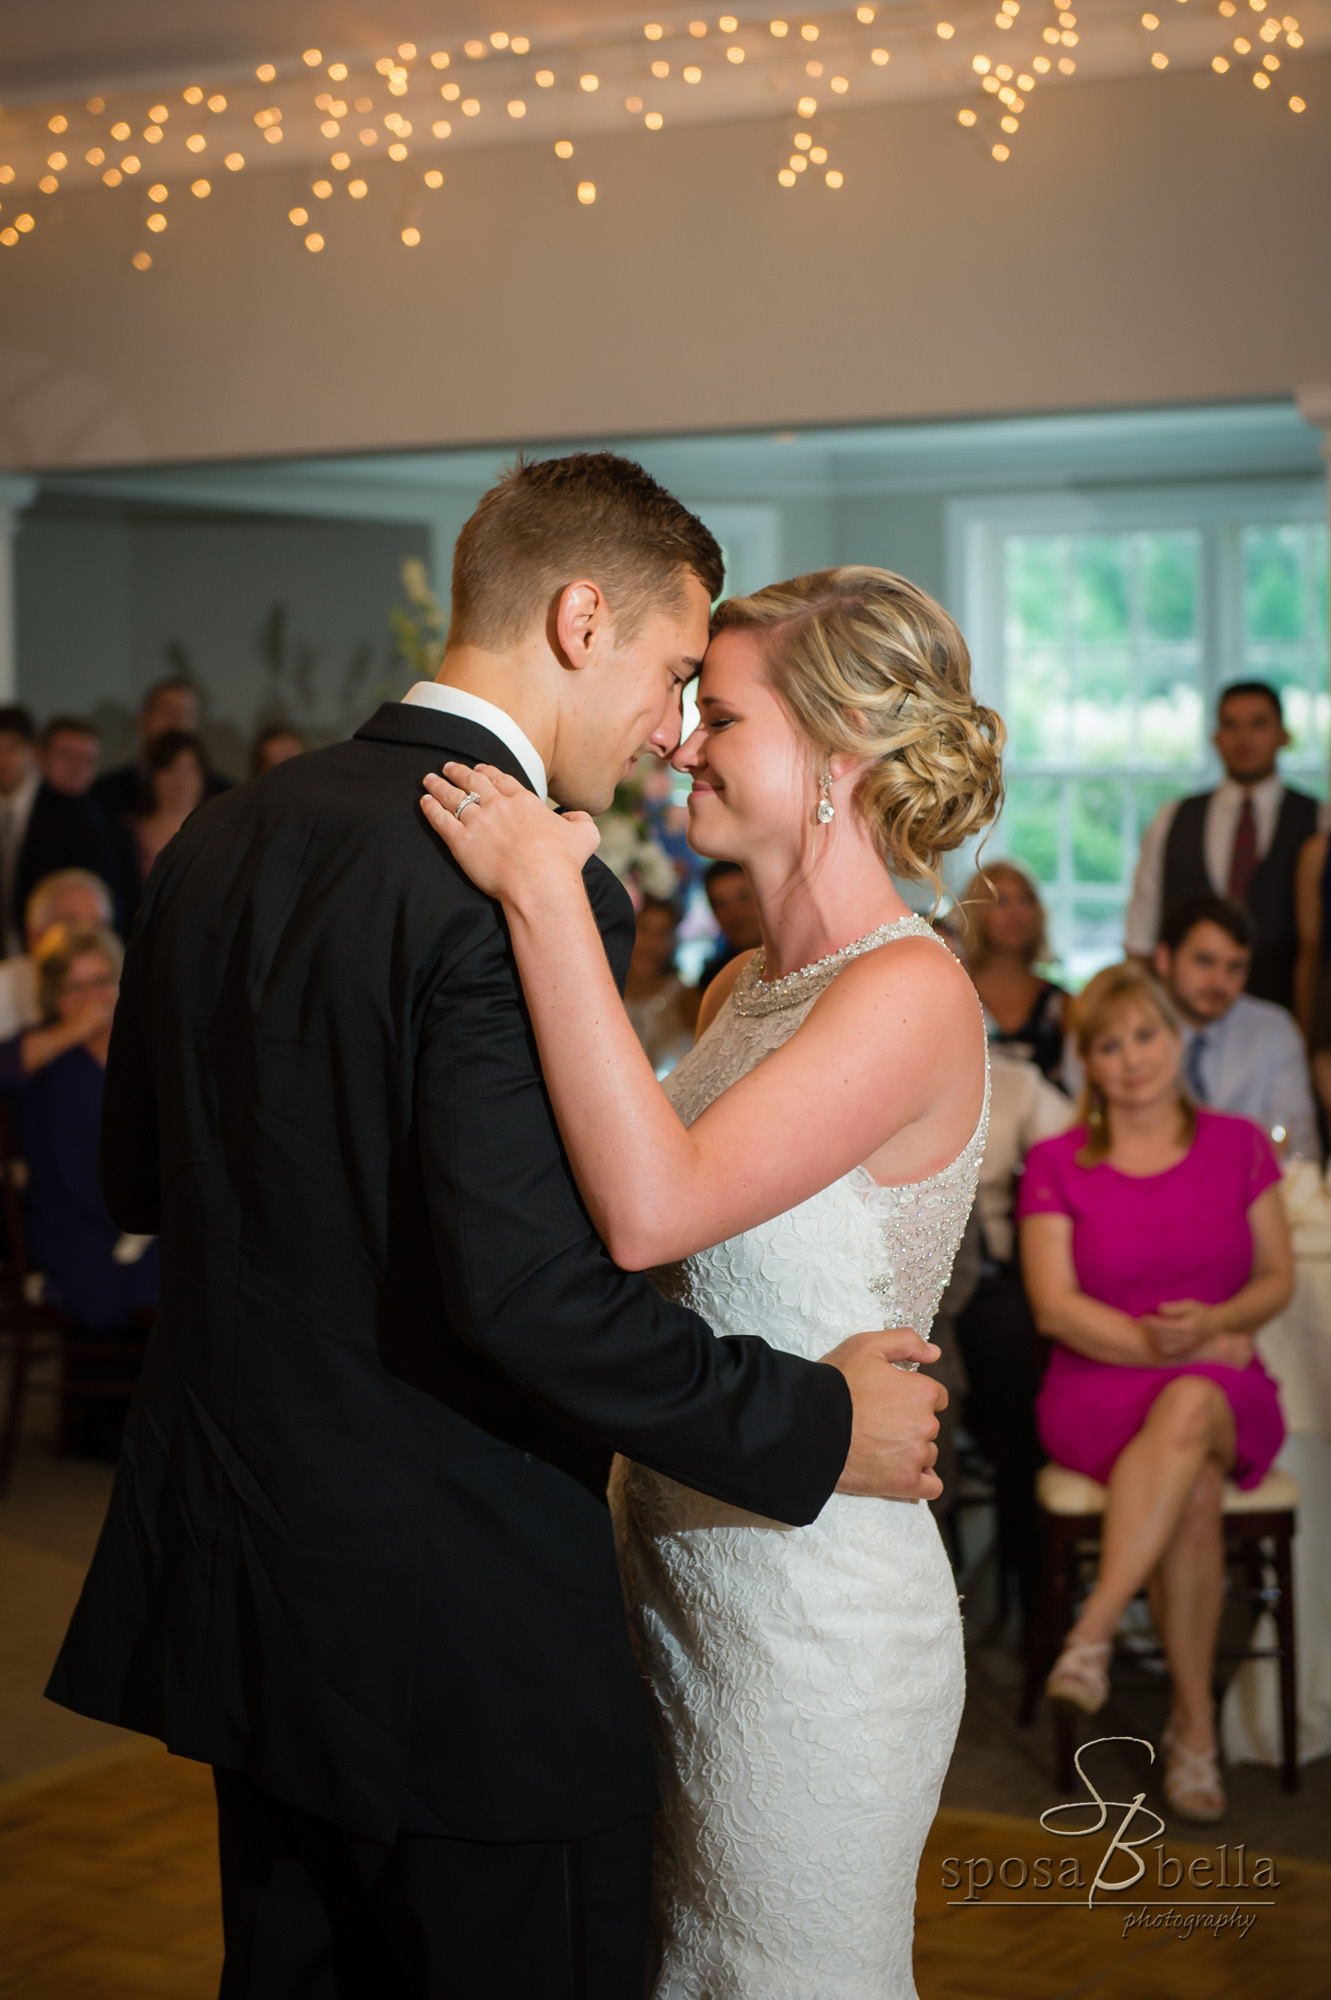  After toasts, Courtney &amp; Chris had their first dance as husband and Wife to "Heaven's Knife" By Josh Garrels 